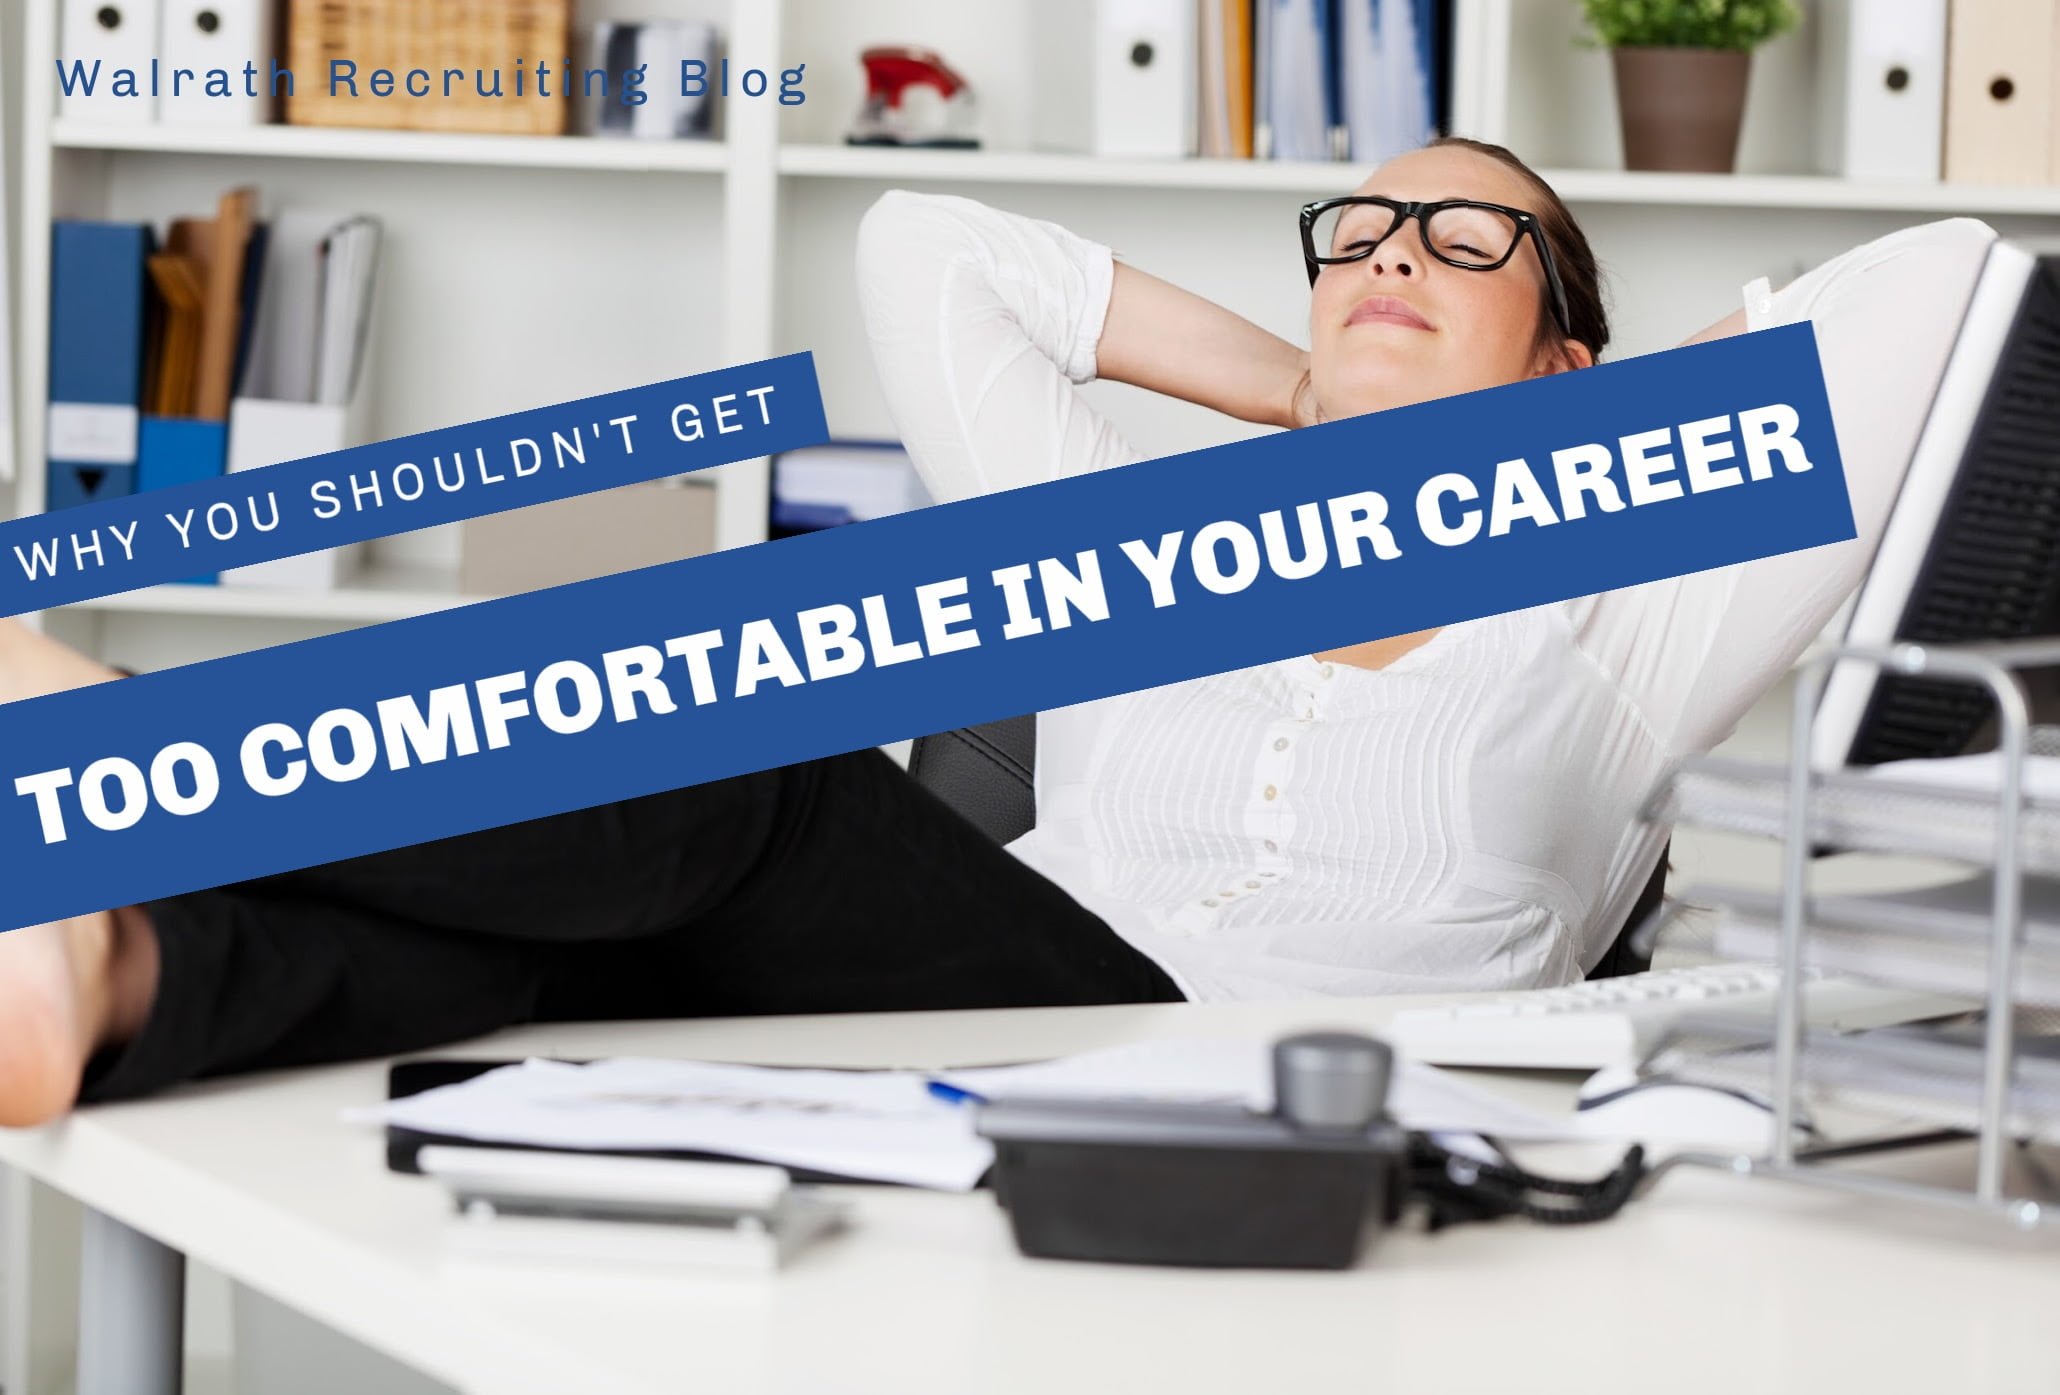 Being too comfortable in your career could cause some issues.